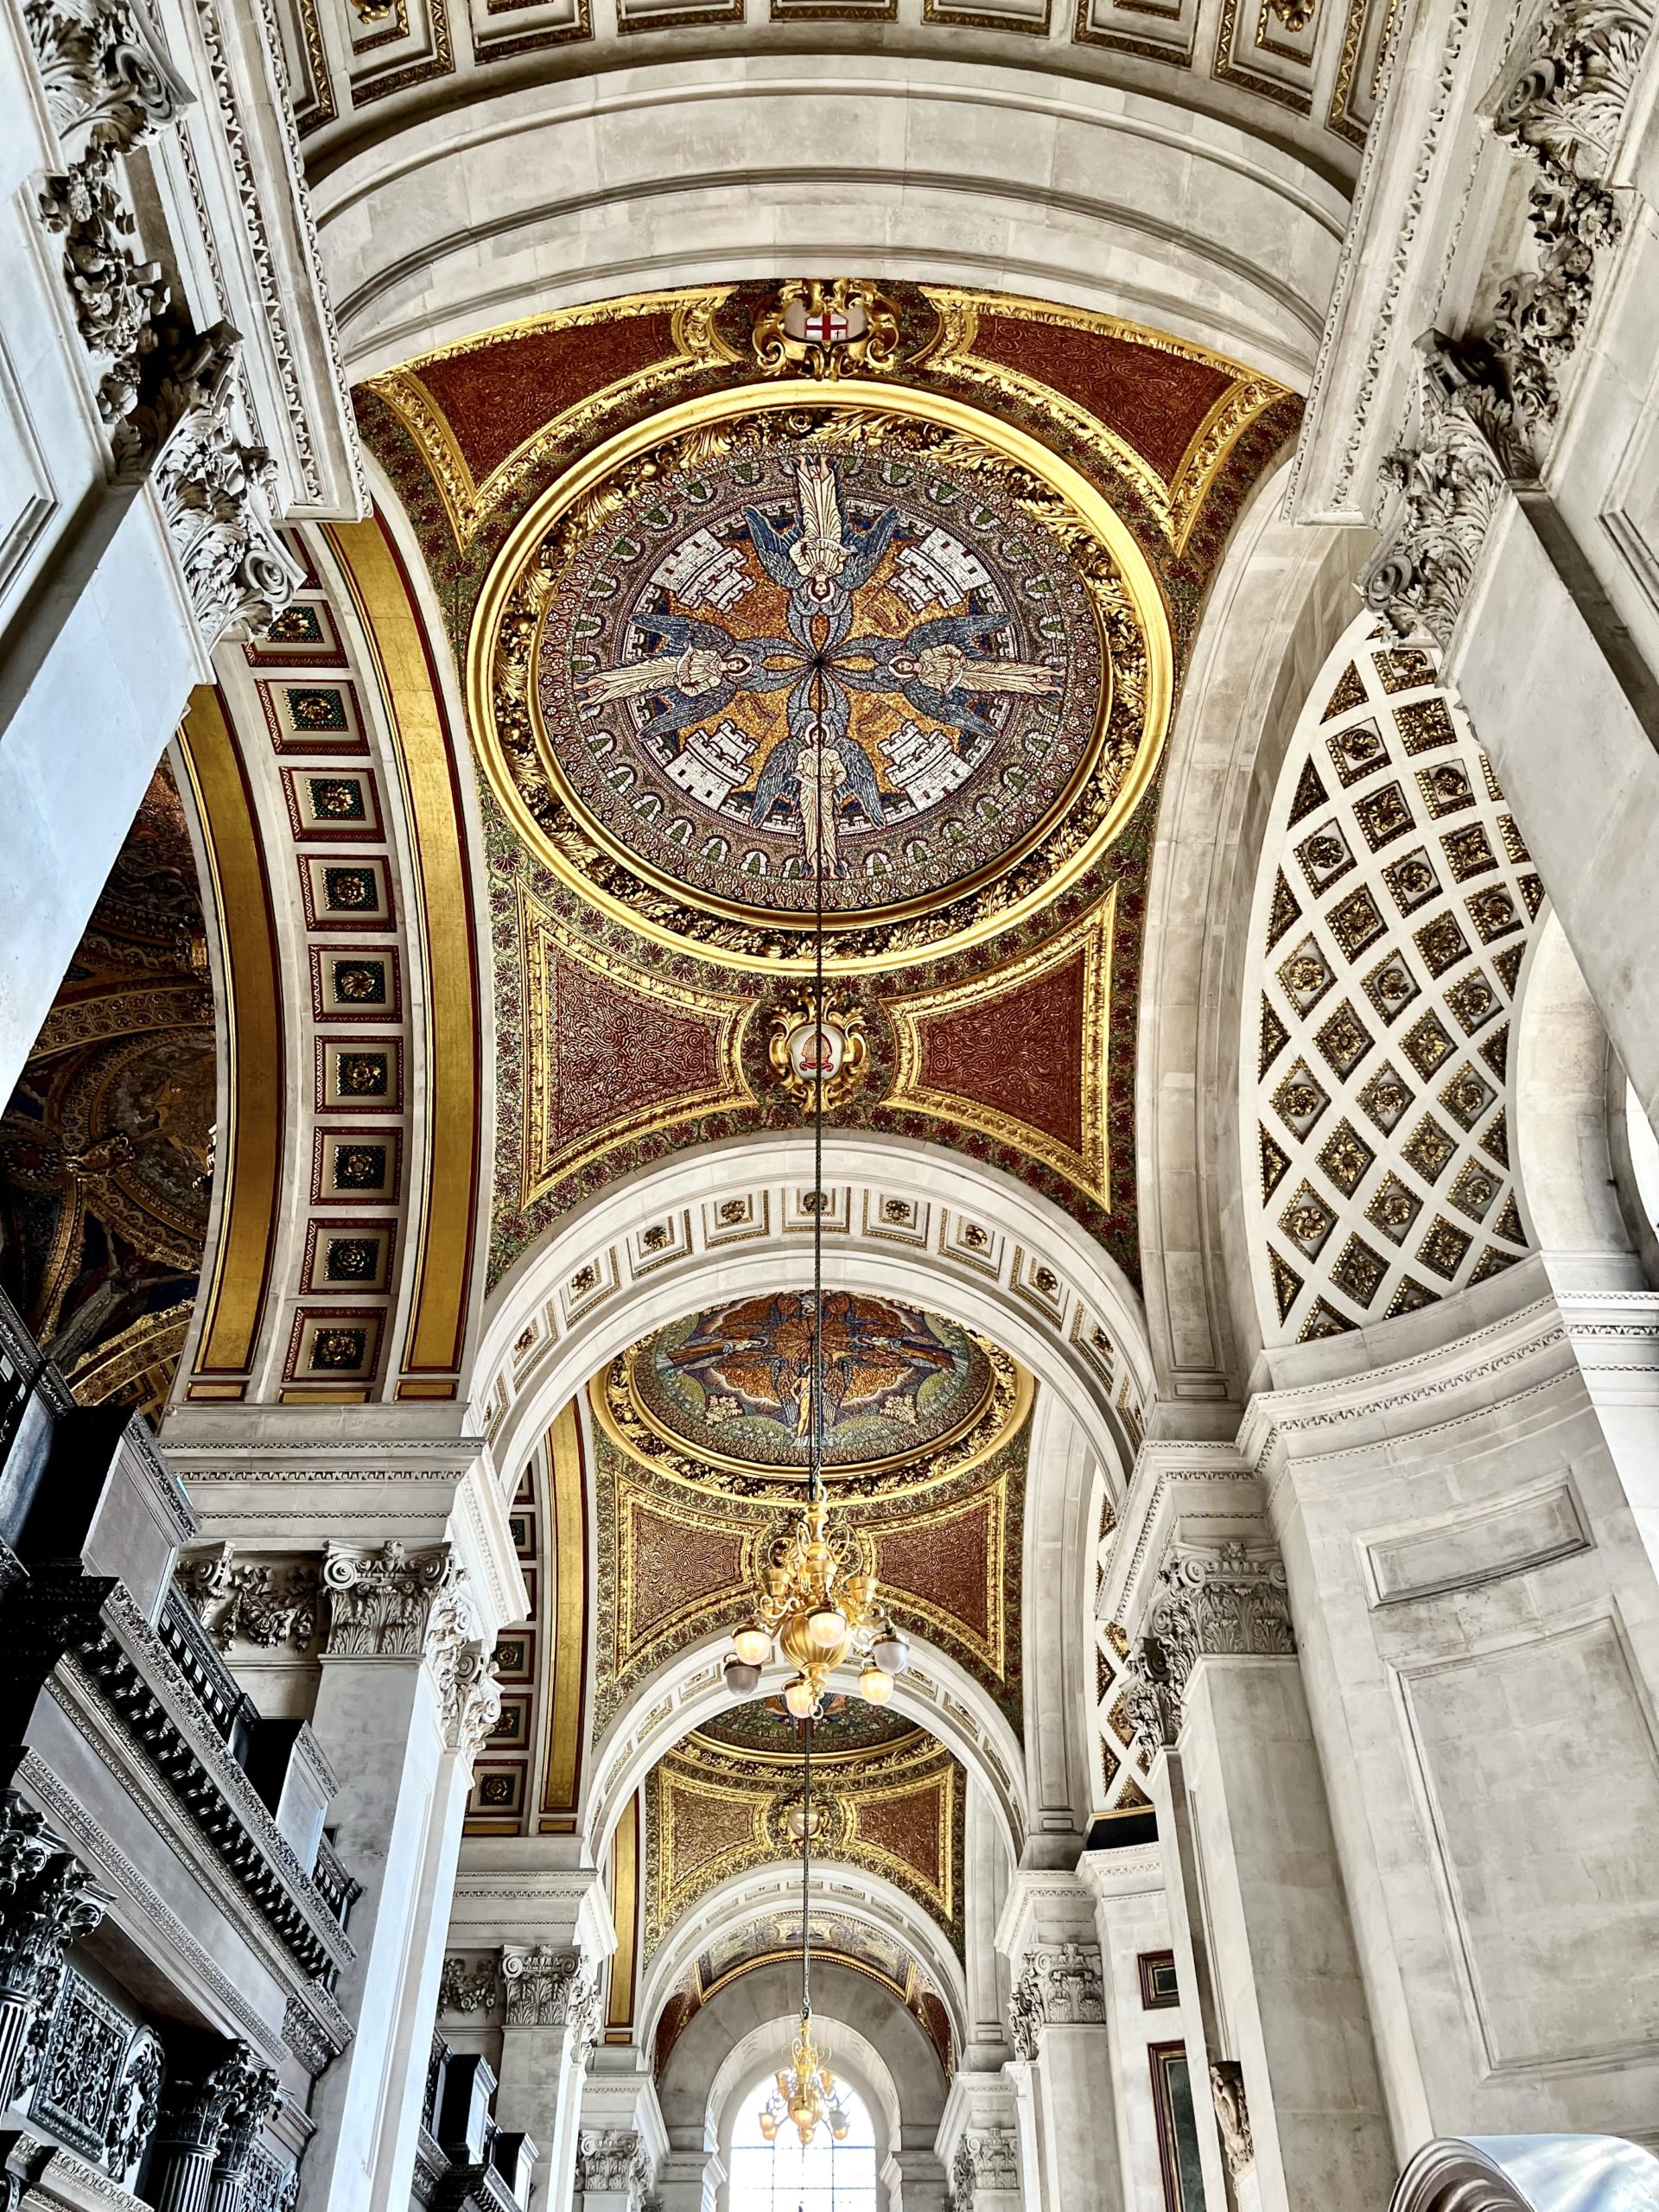 mosaics in St. Paul's Cathedral